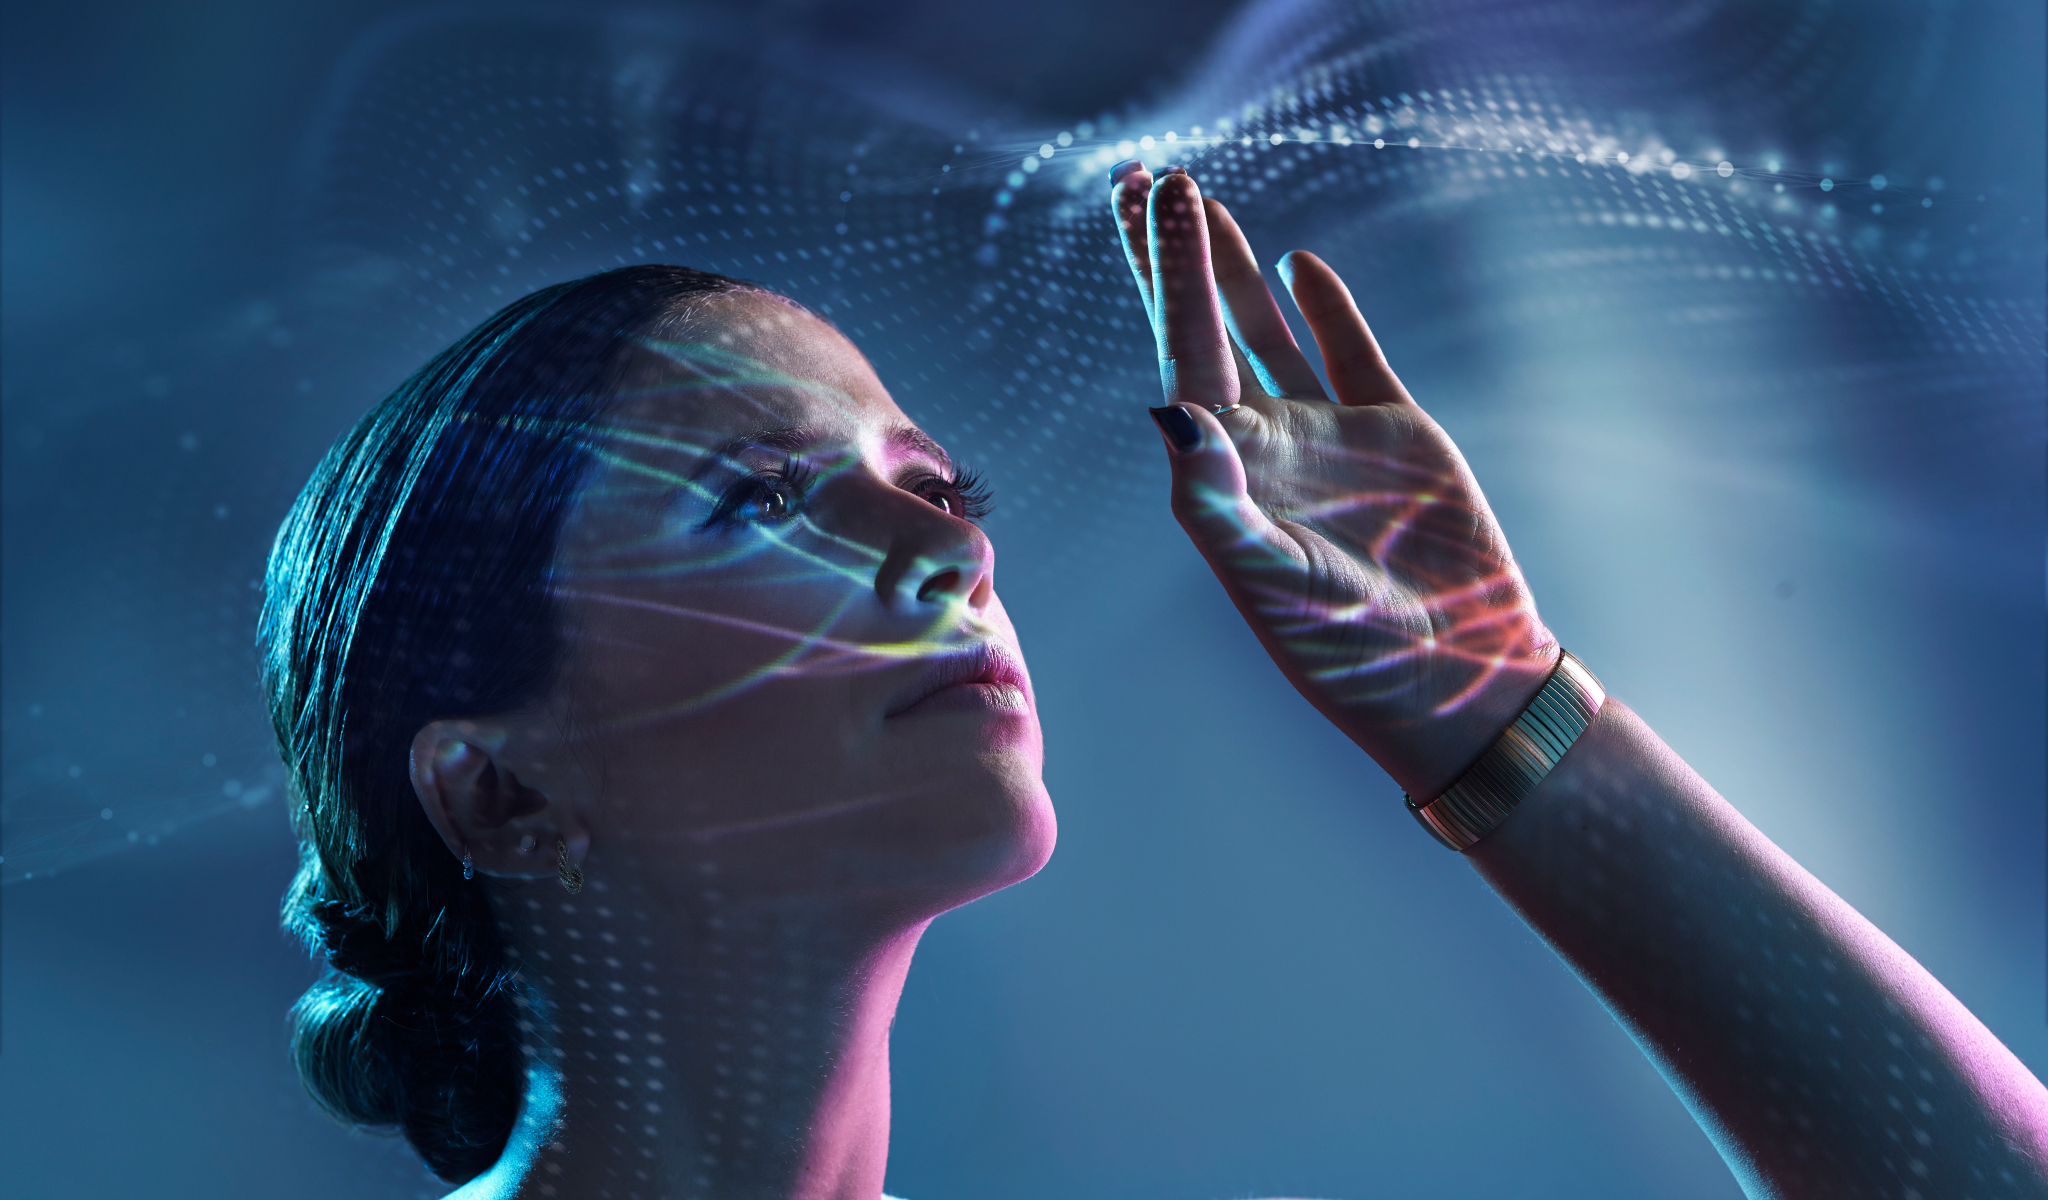 Image of woman interacting with abstract virtual experience